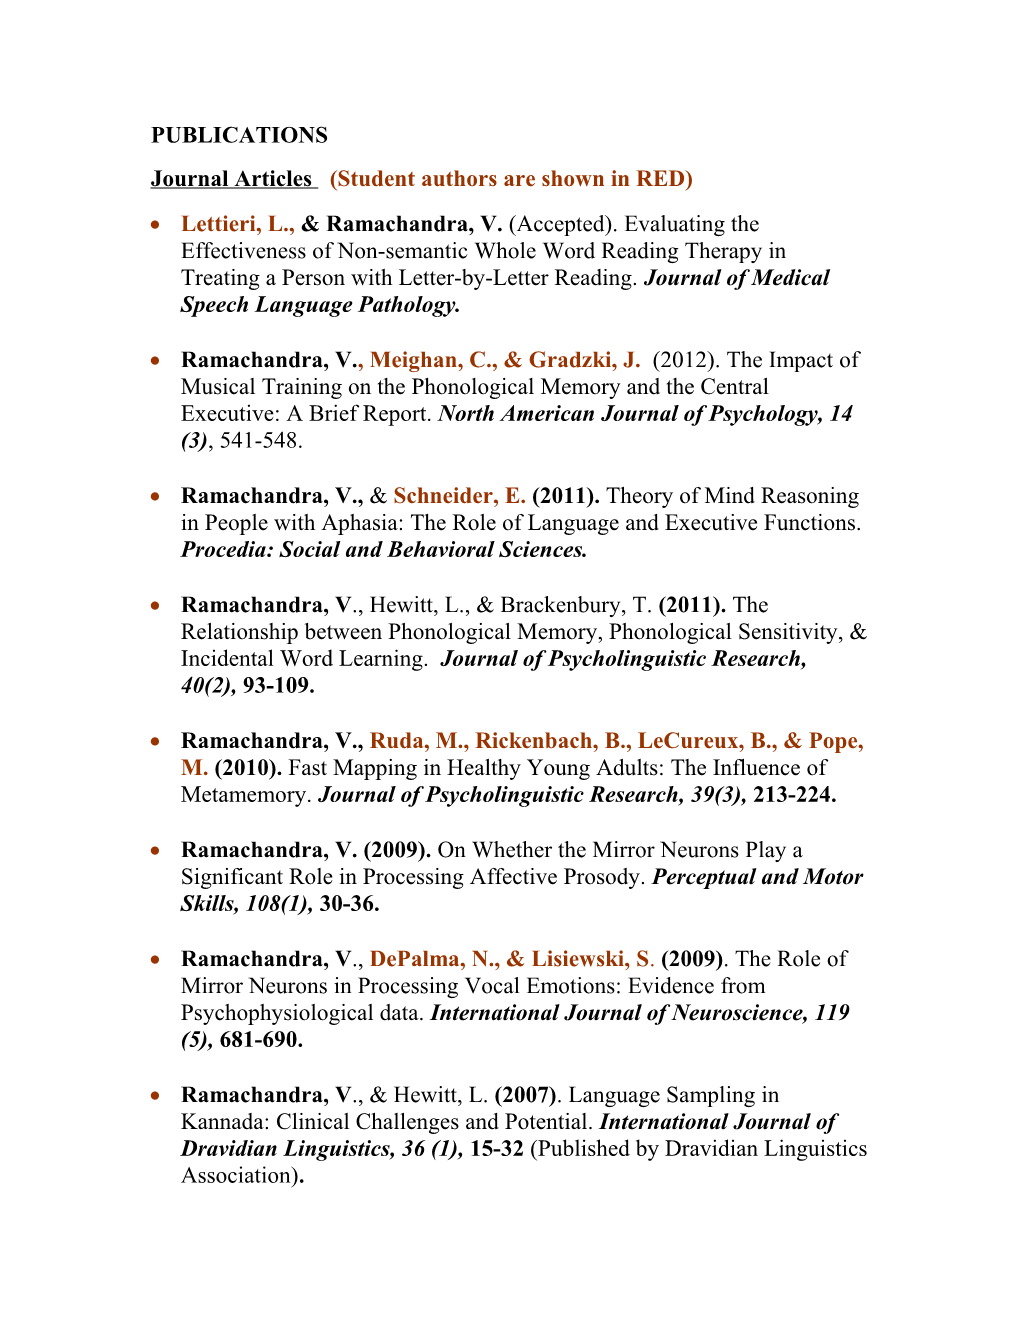 Journal Articles (Student Authors Are Shown in RED)